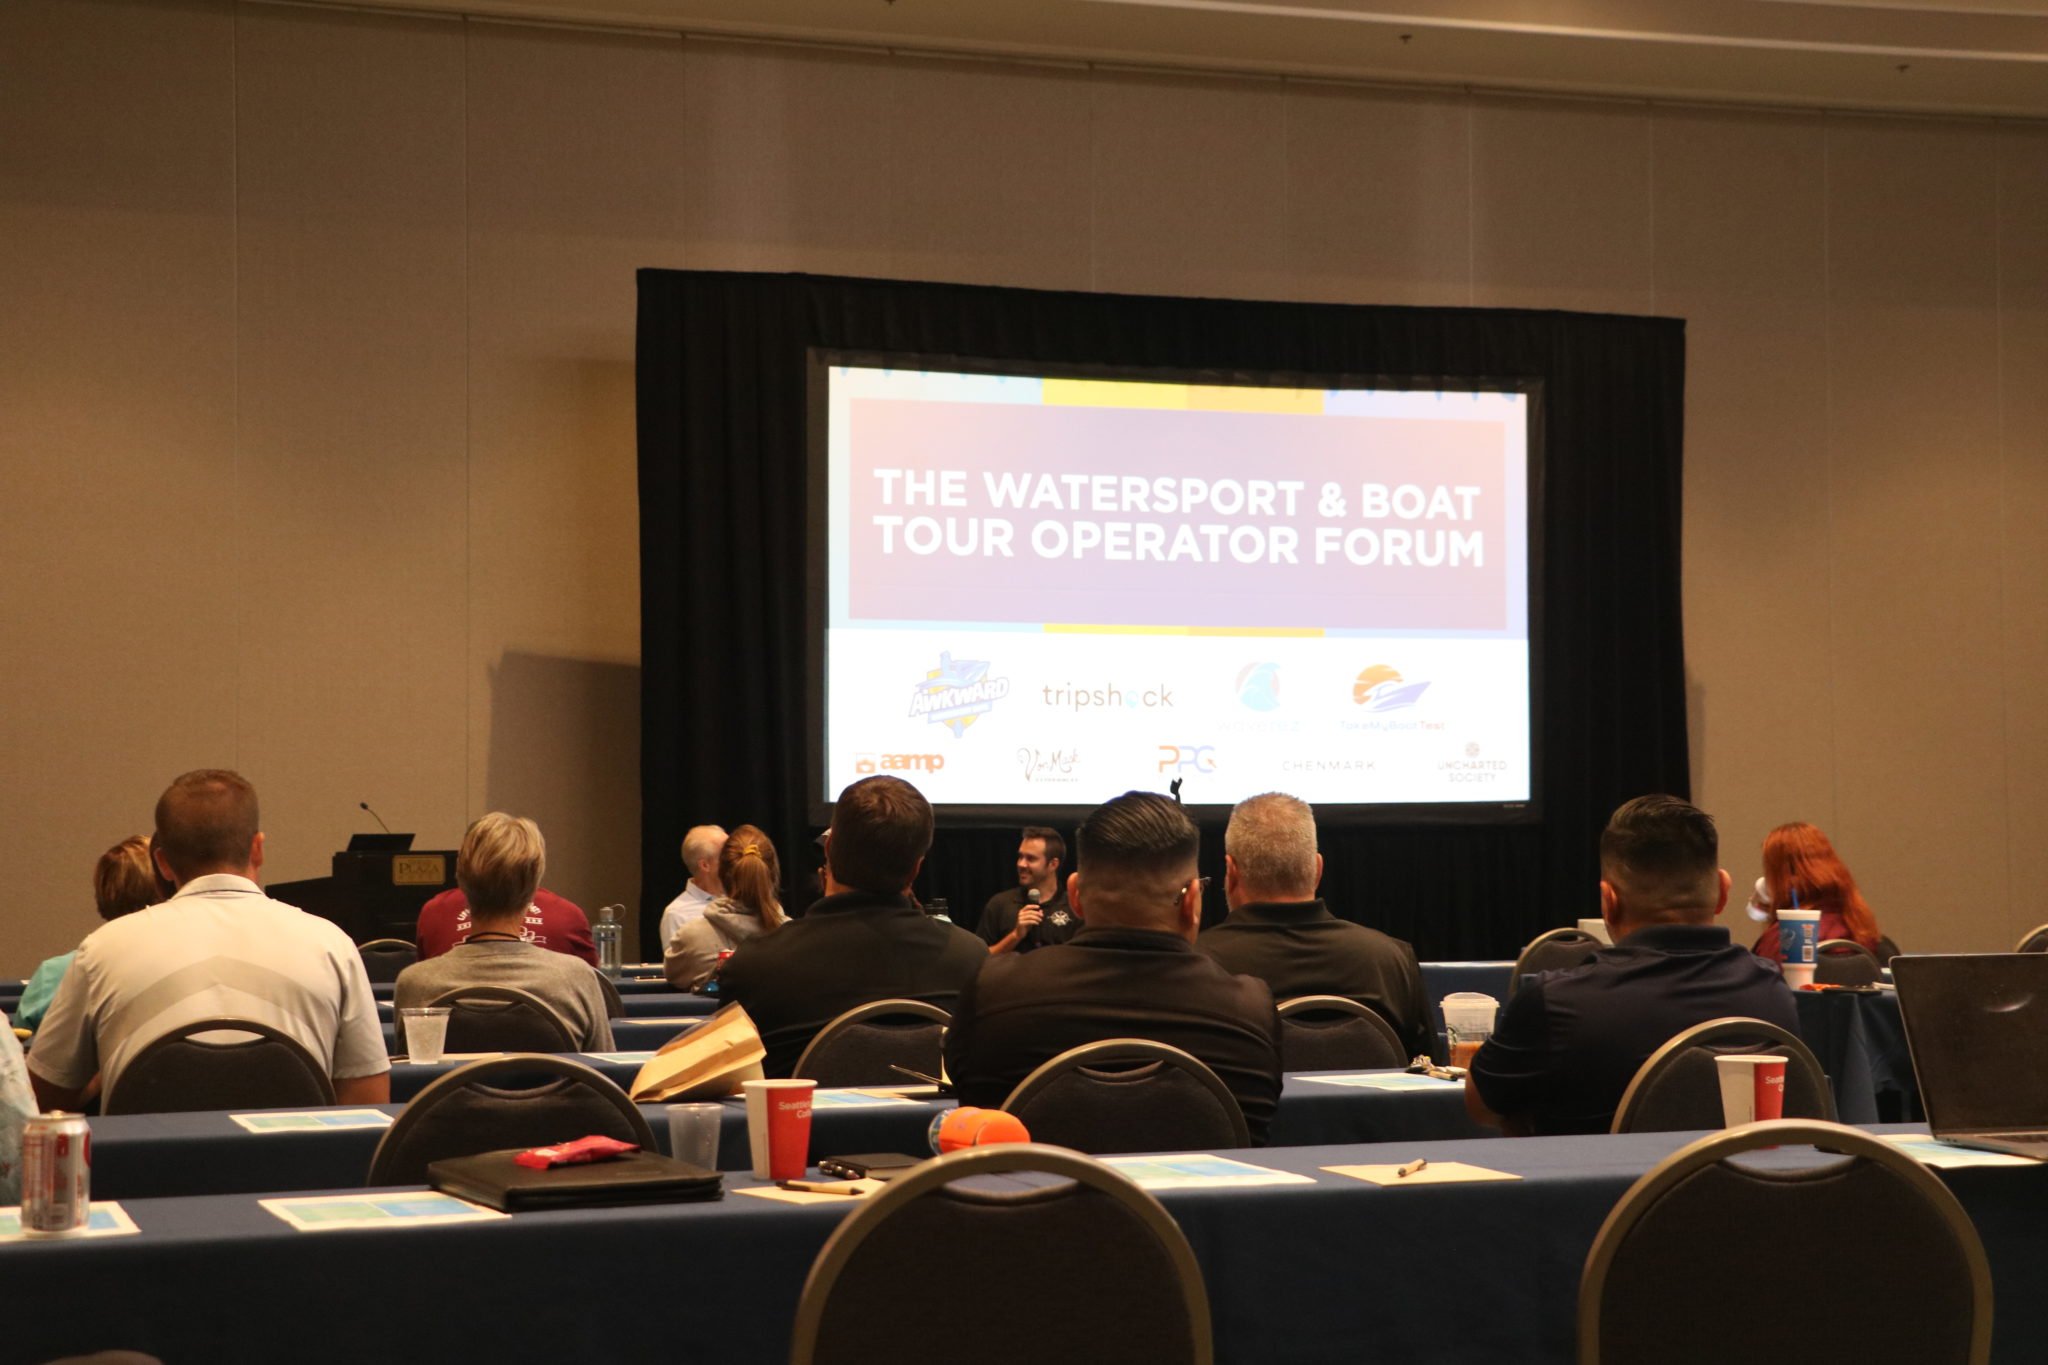 The Watersport & Boat Tour Operator Forum 2022 Highlights